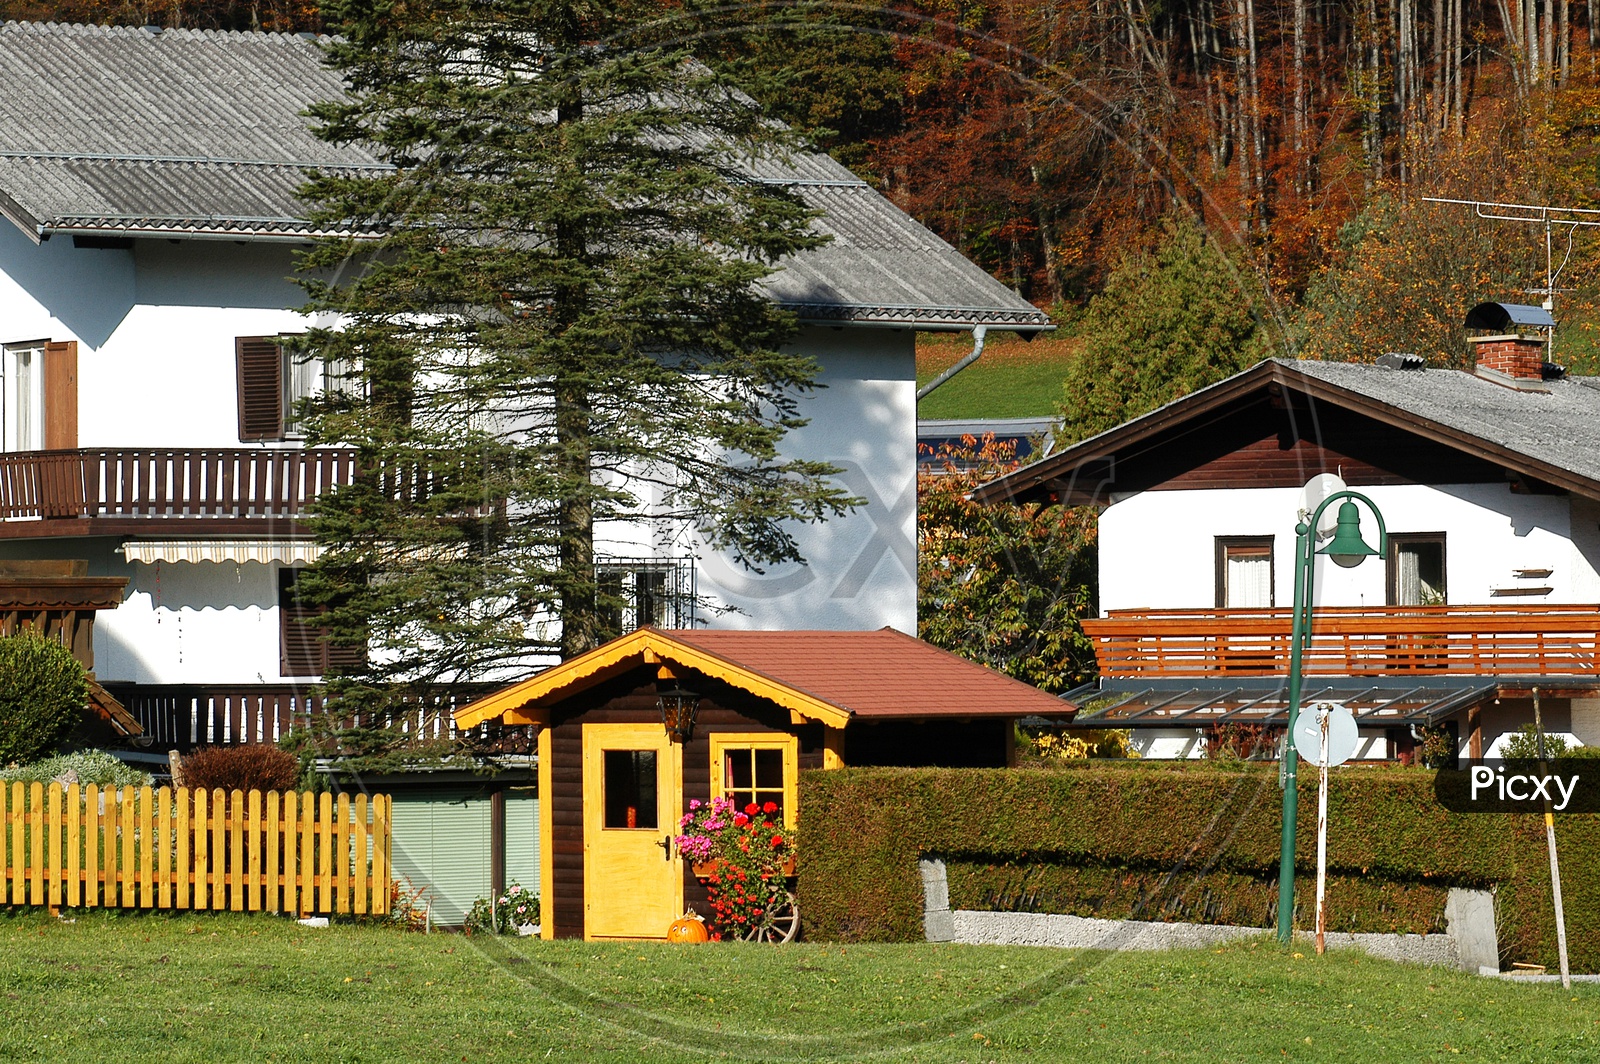 Wooden houses alongside the Alpines